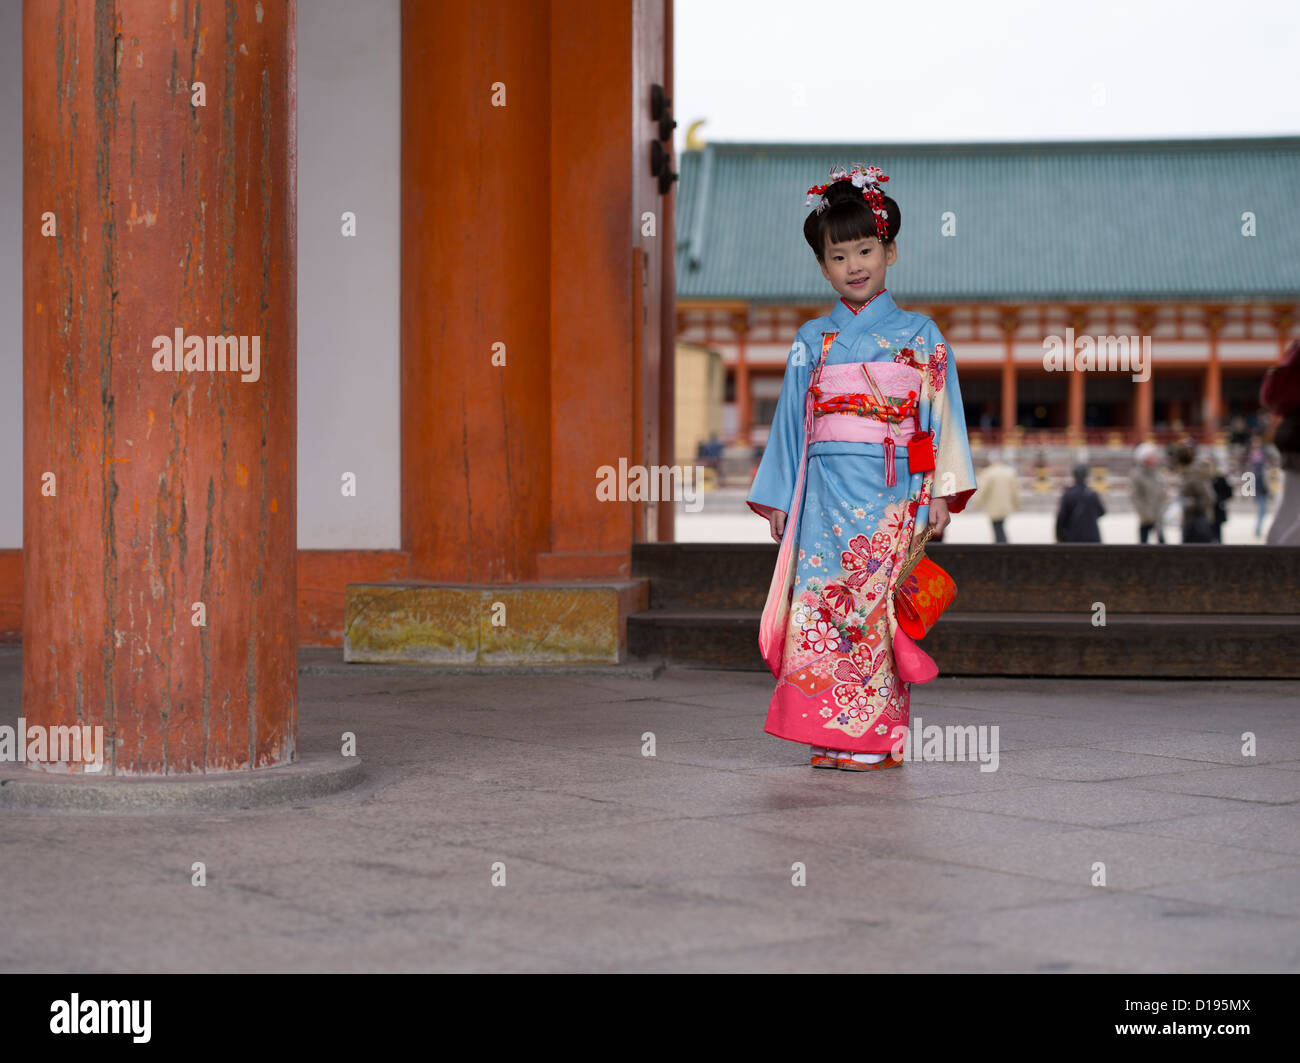 Young Japanese girl in kimono and obi visits a shrine in Kyoto Japan. Children aged 7, 5 and 3 visit shrines on their birthday. Stock Photo